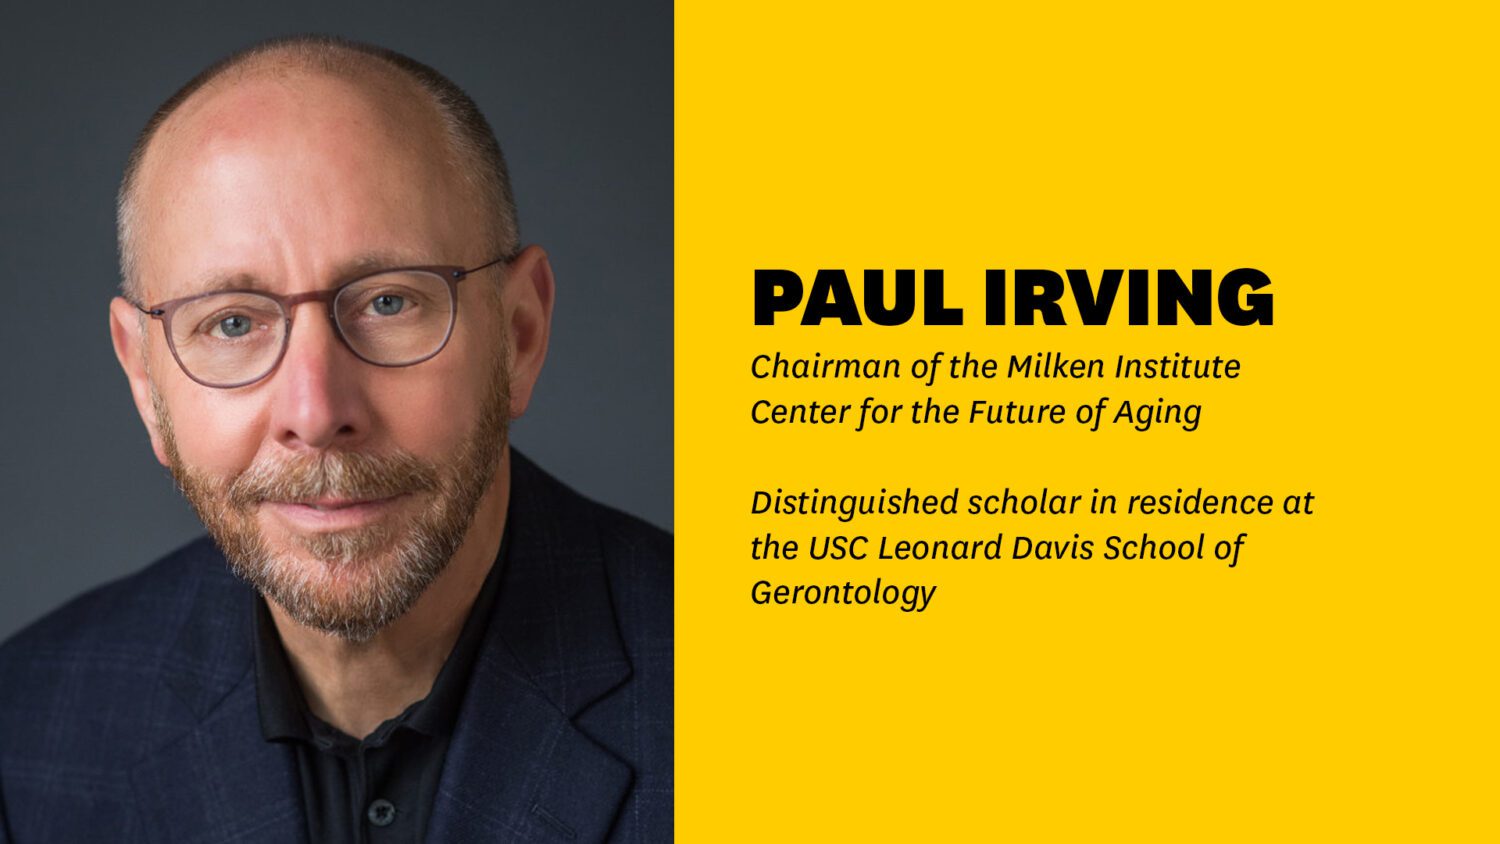 Paul lrving: the future of aging